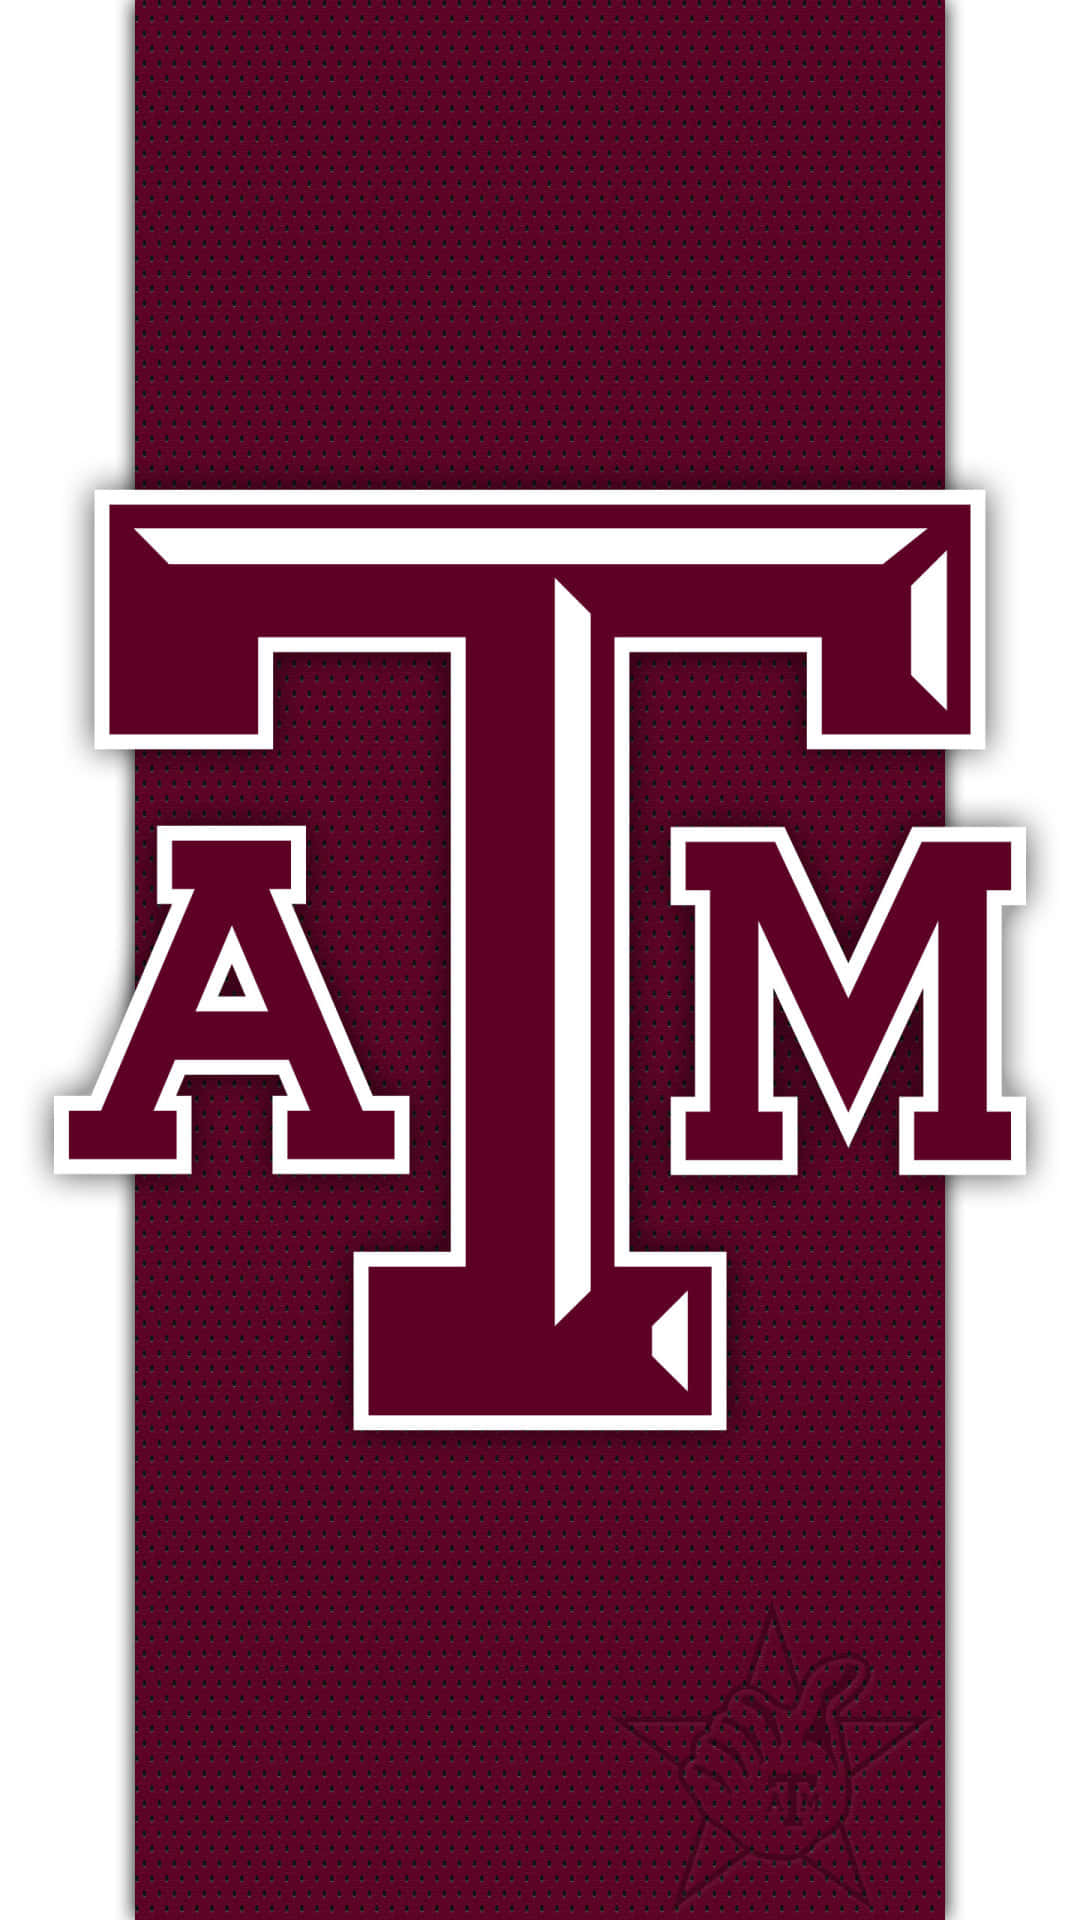 Texas A&m Aggies Logo On A Maroon Background Wallpaper